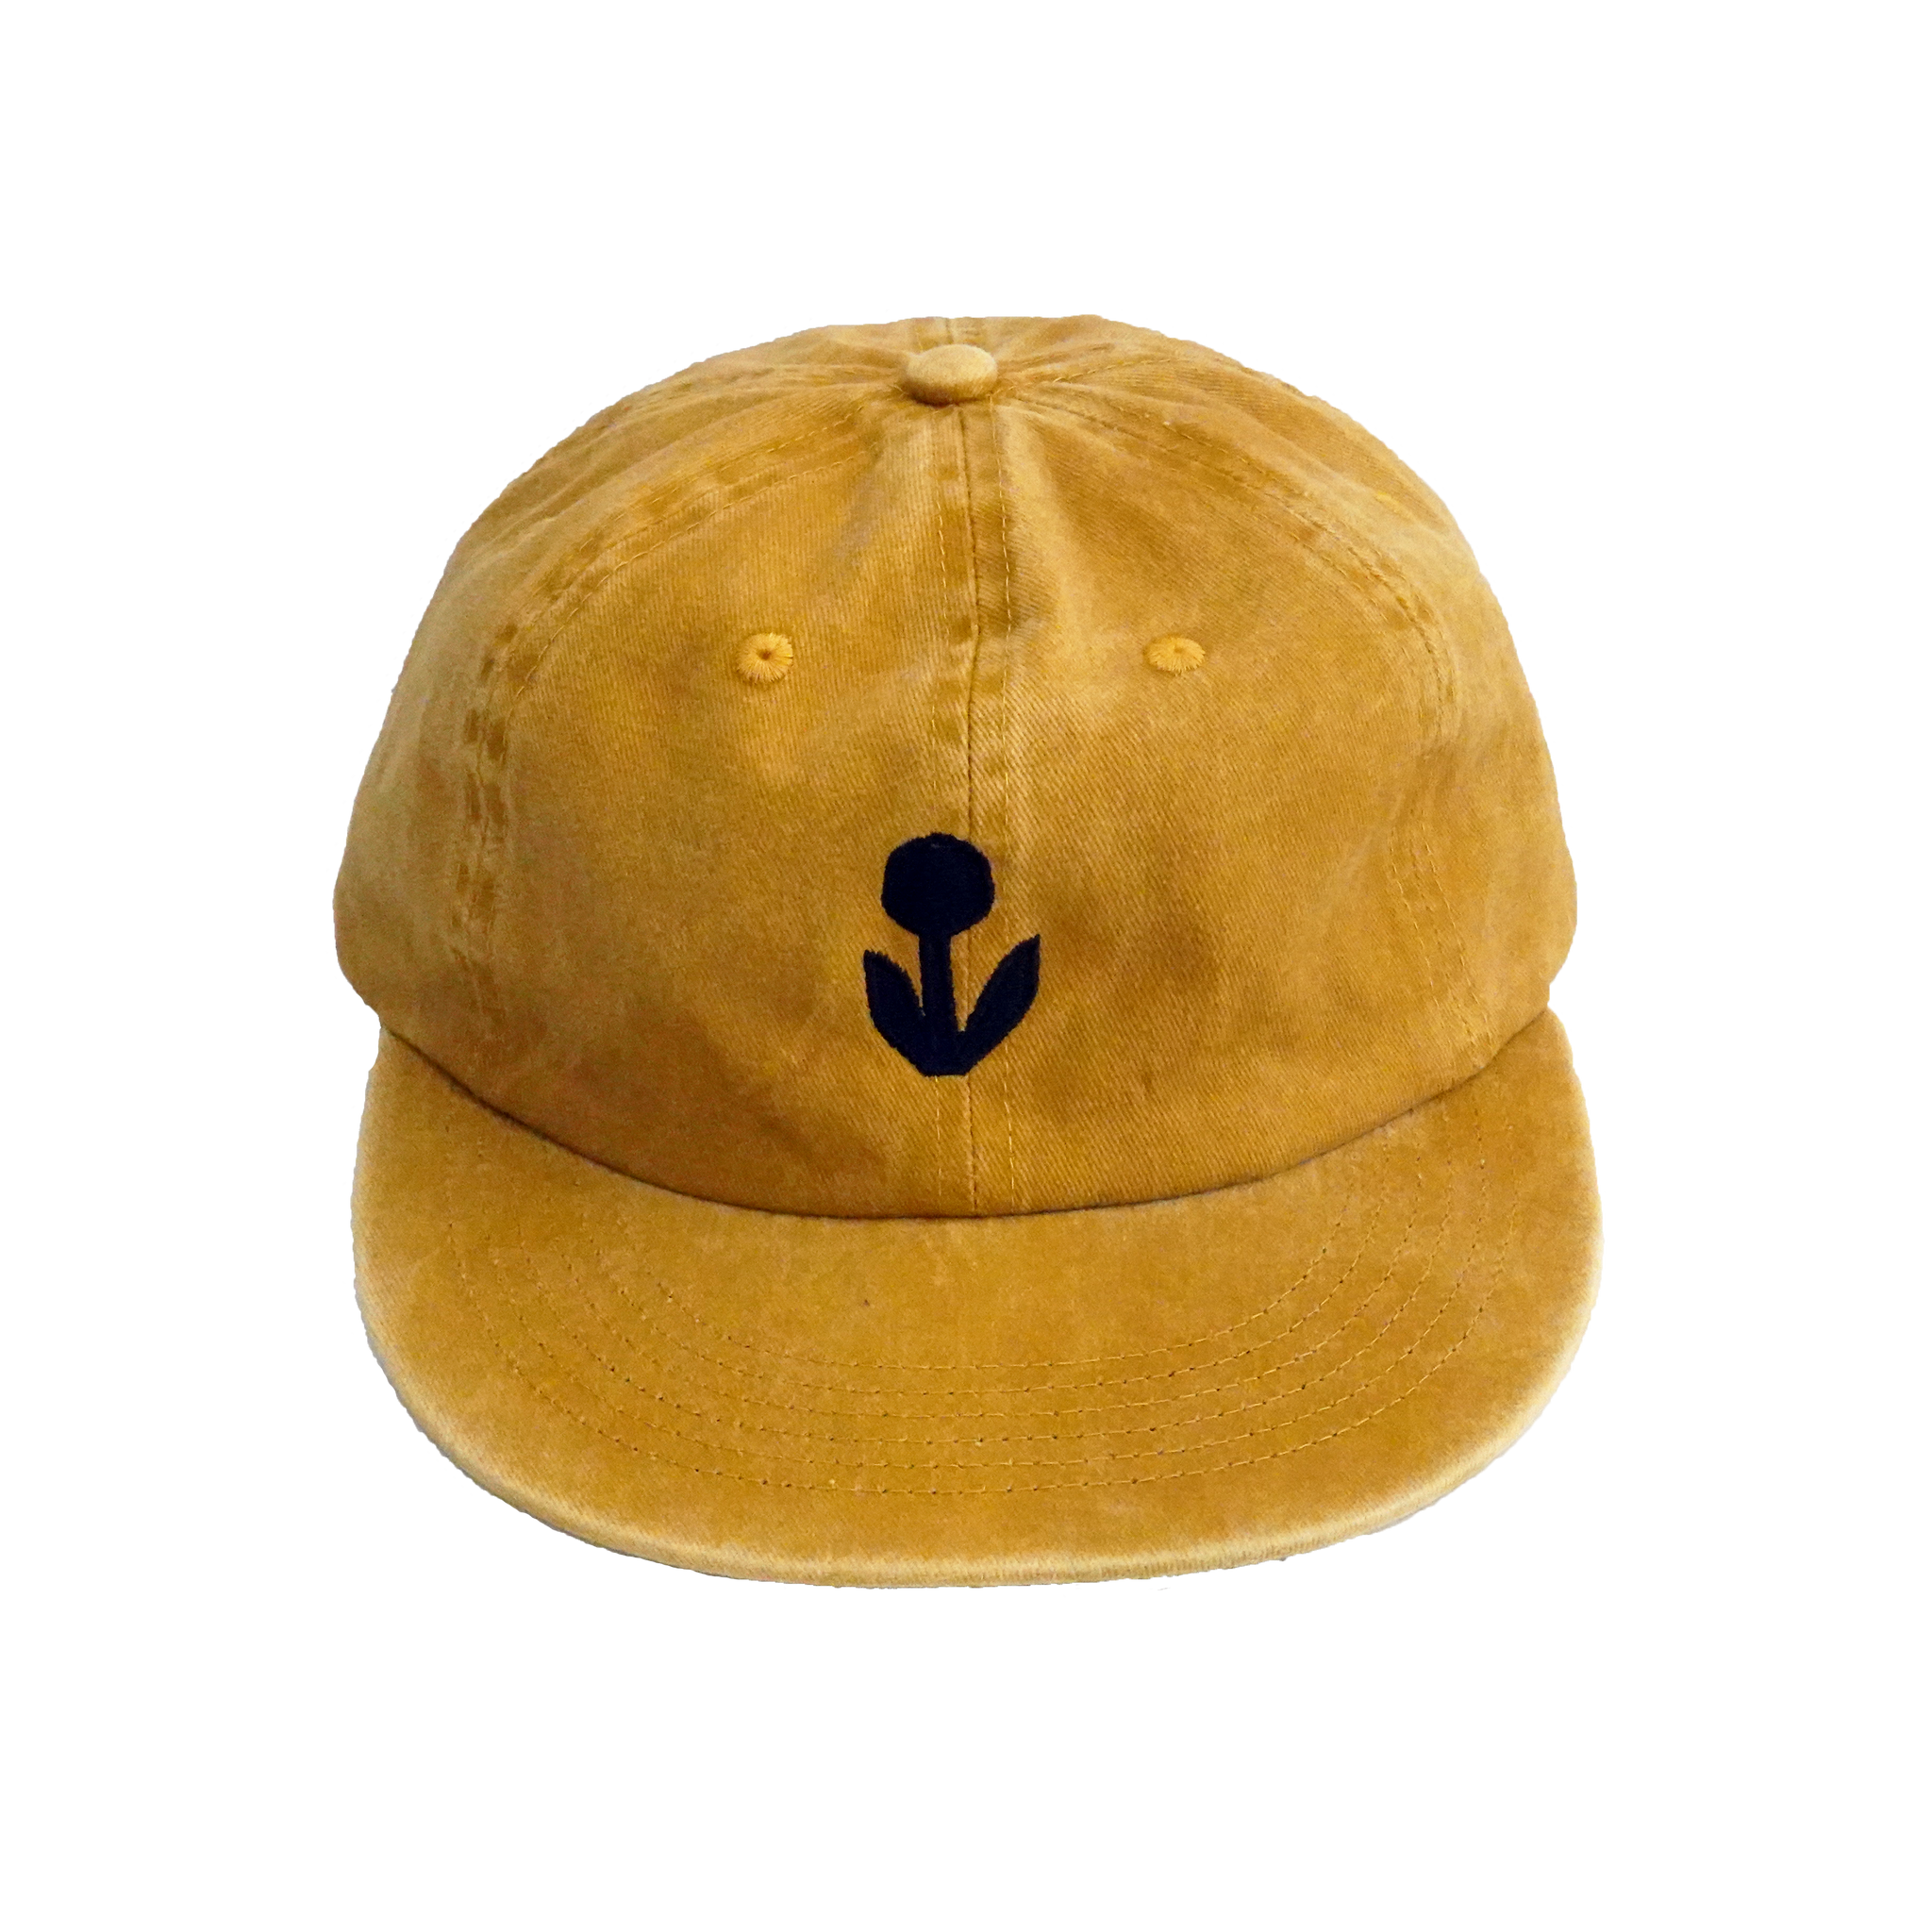 Groundwork unstructured 6-panel cotton hat in marigold with embroidered flower logo on front.